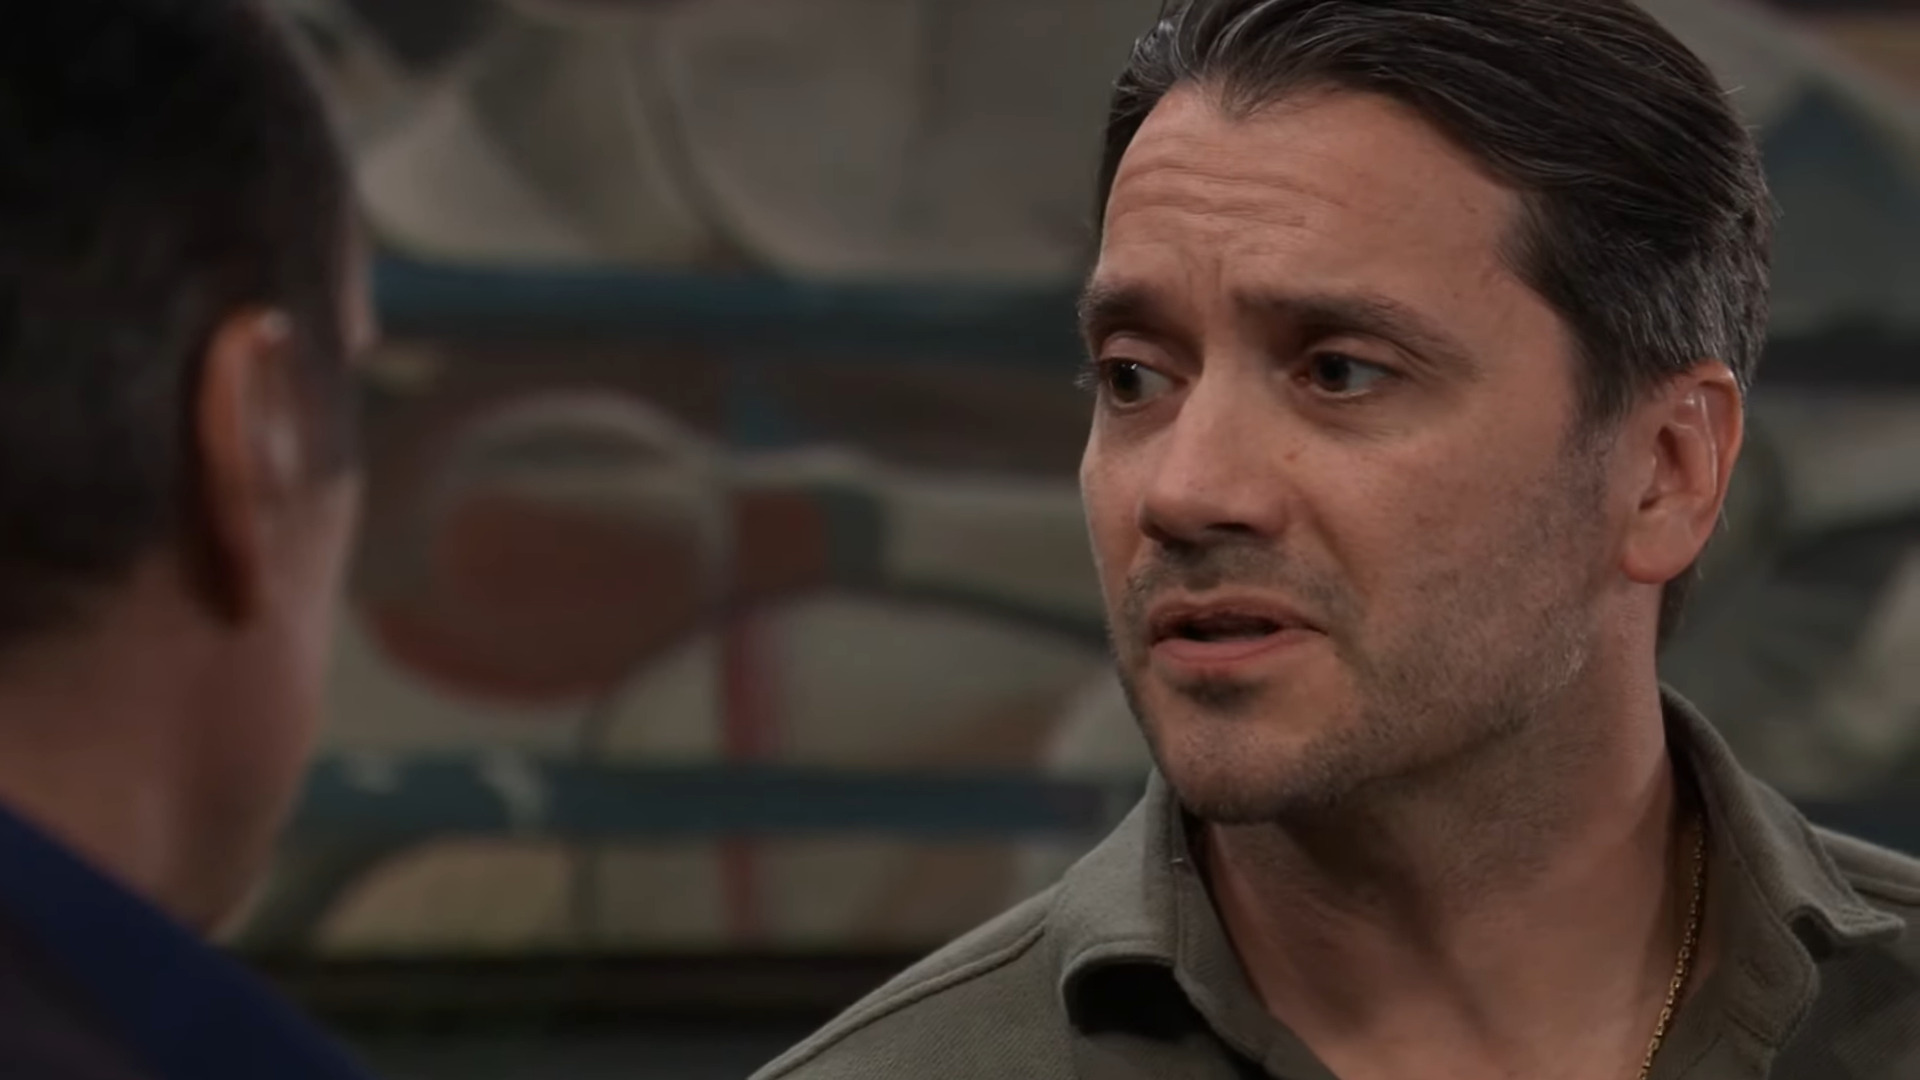 dante tells sonny he wouldn't be there if not for him